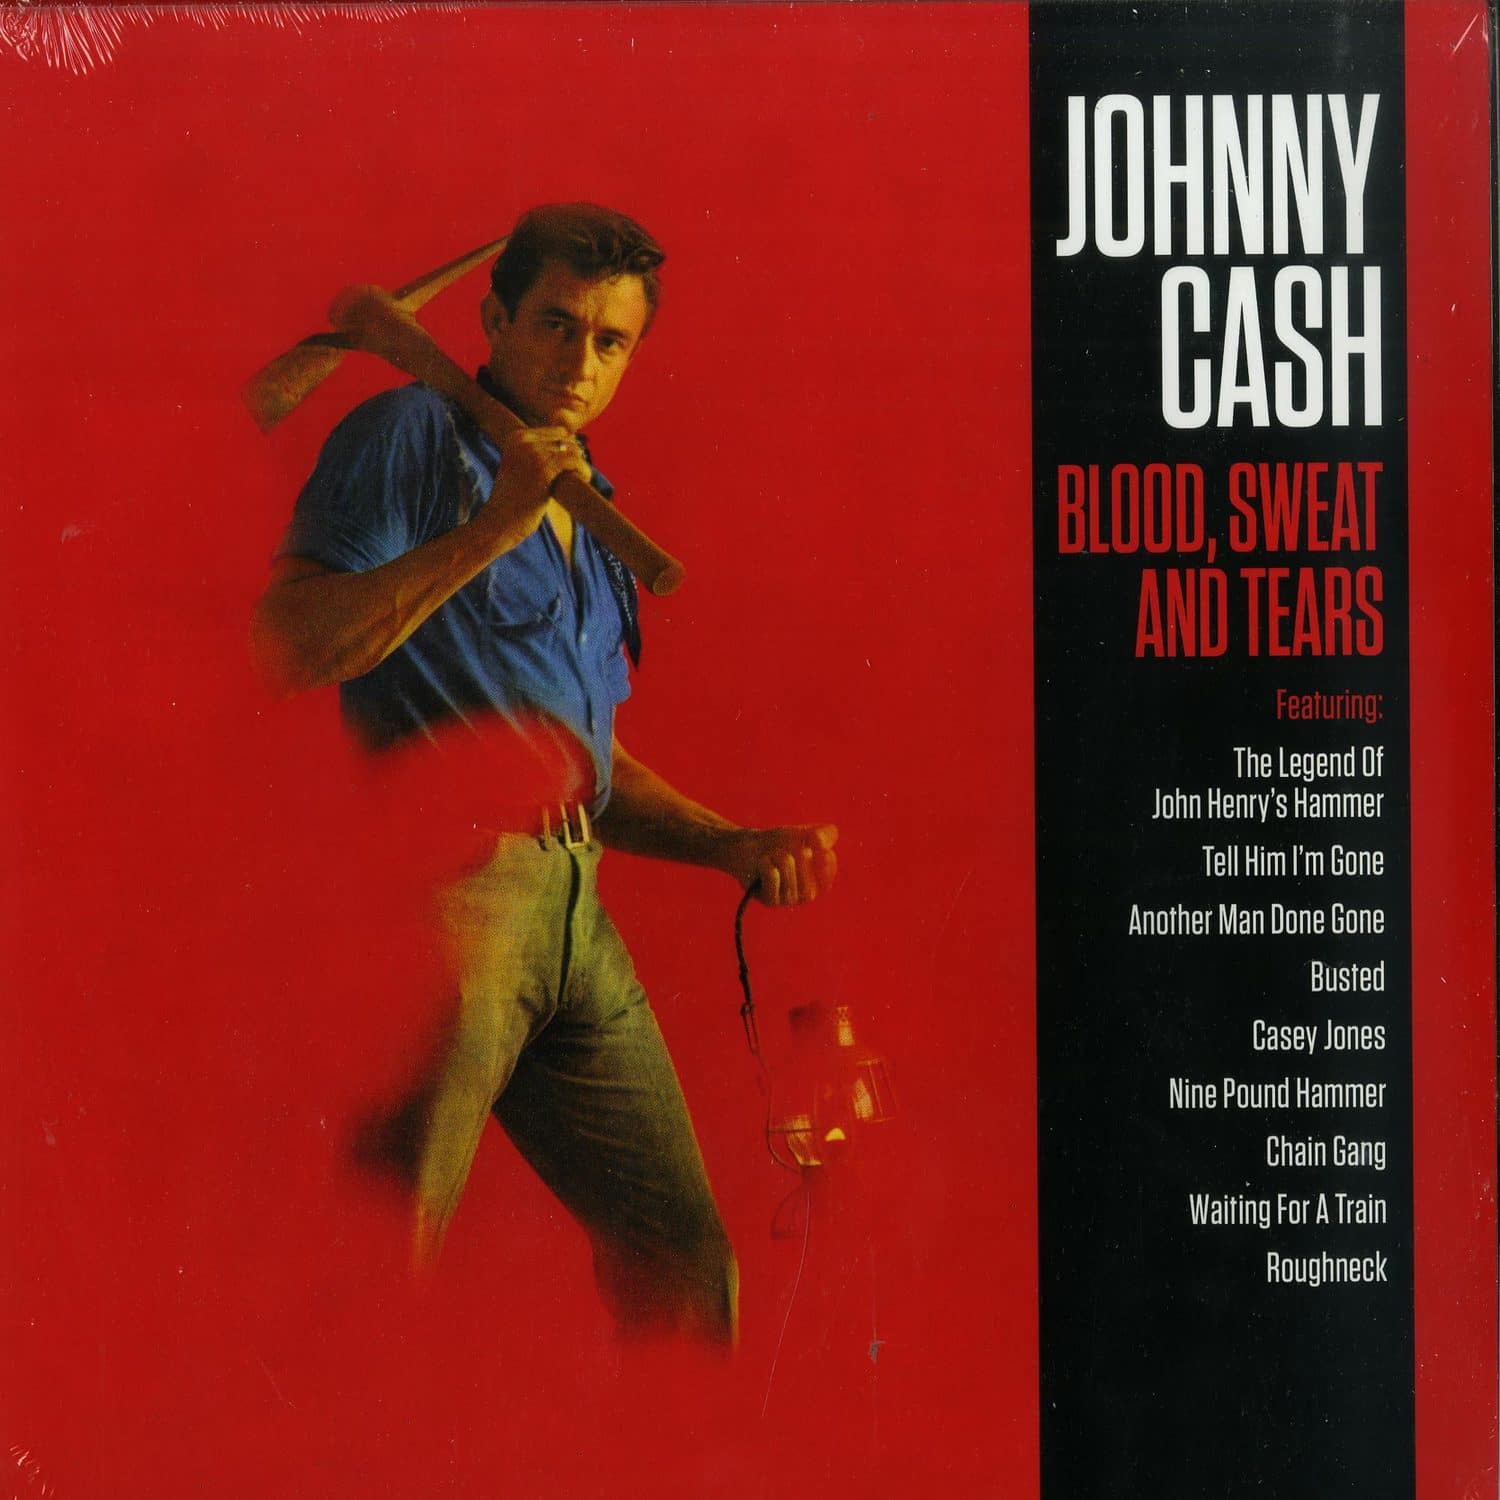 Johnny Cash - BLOOD SWEAT AND TEARS 